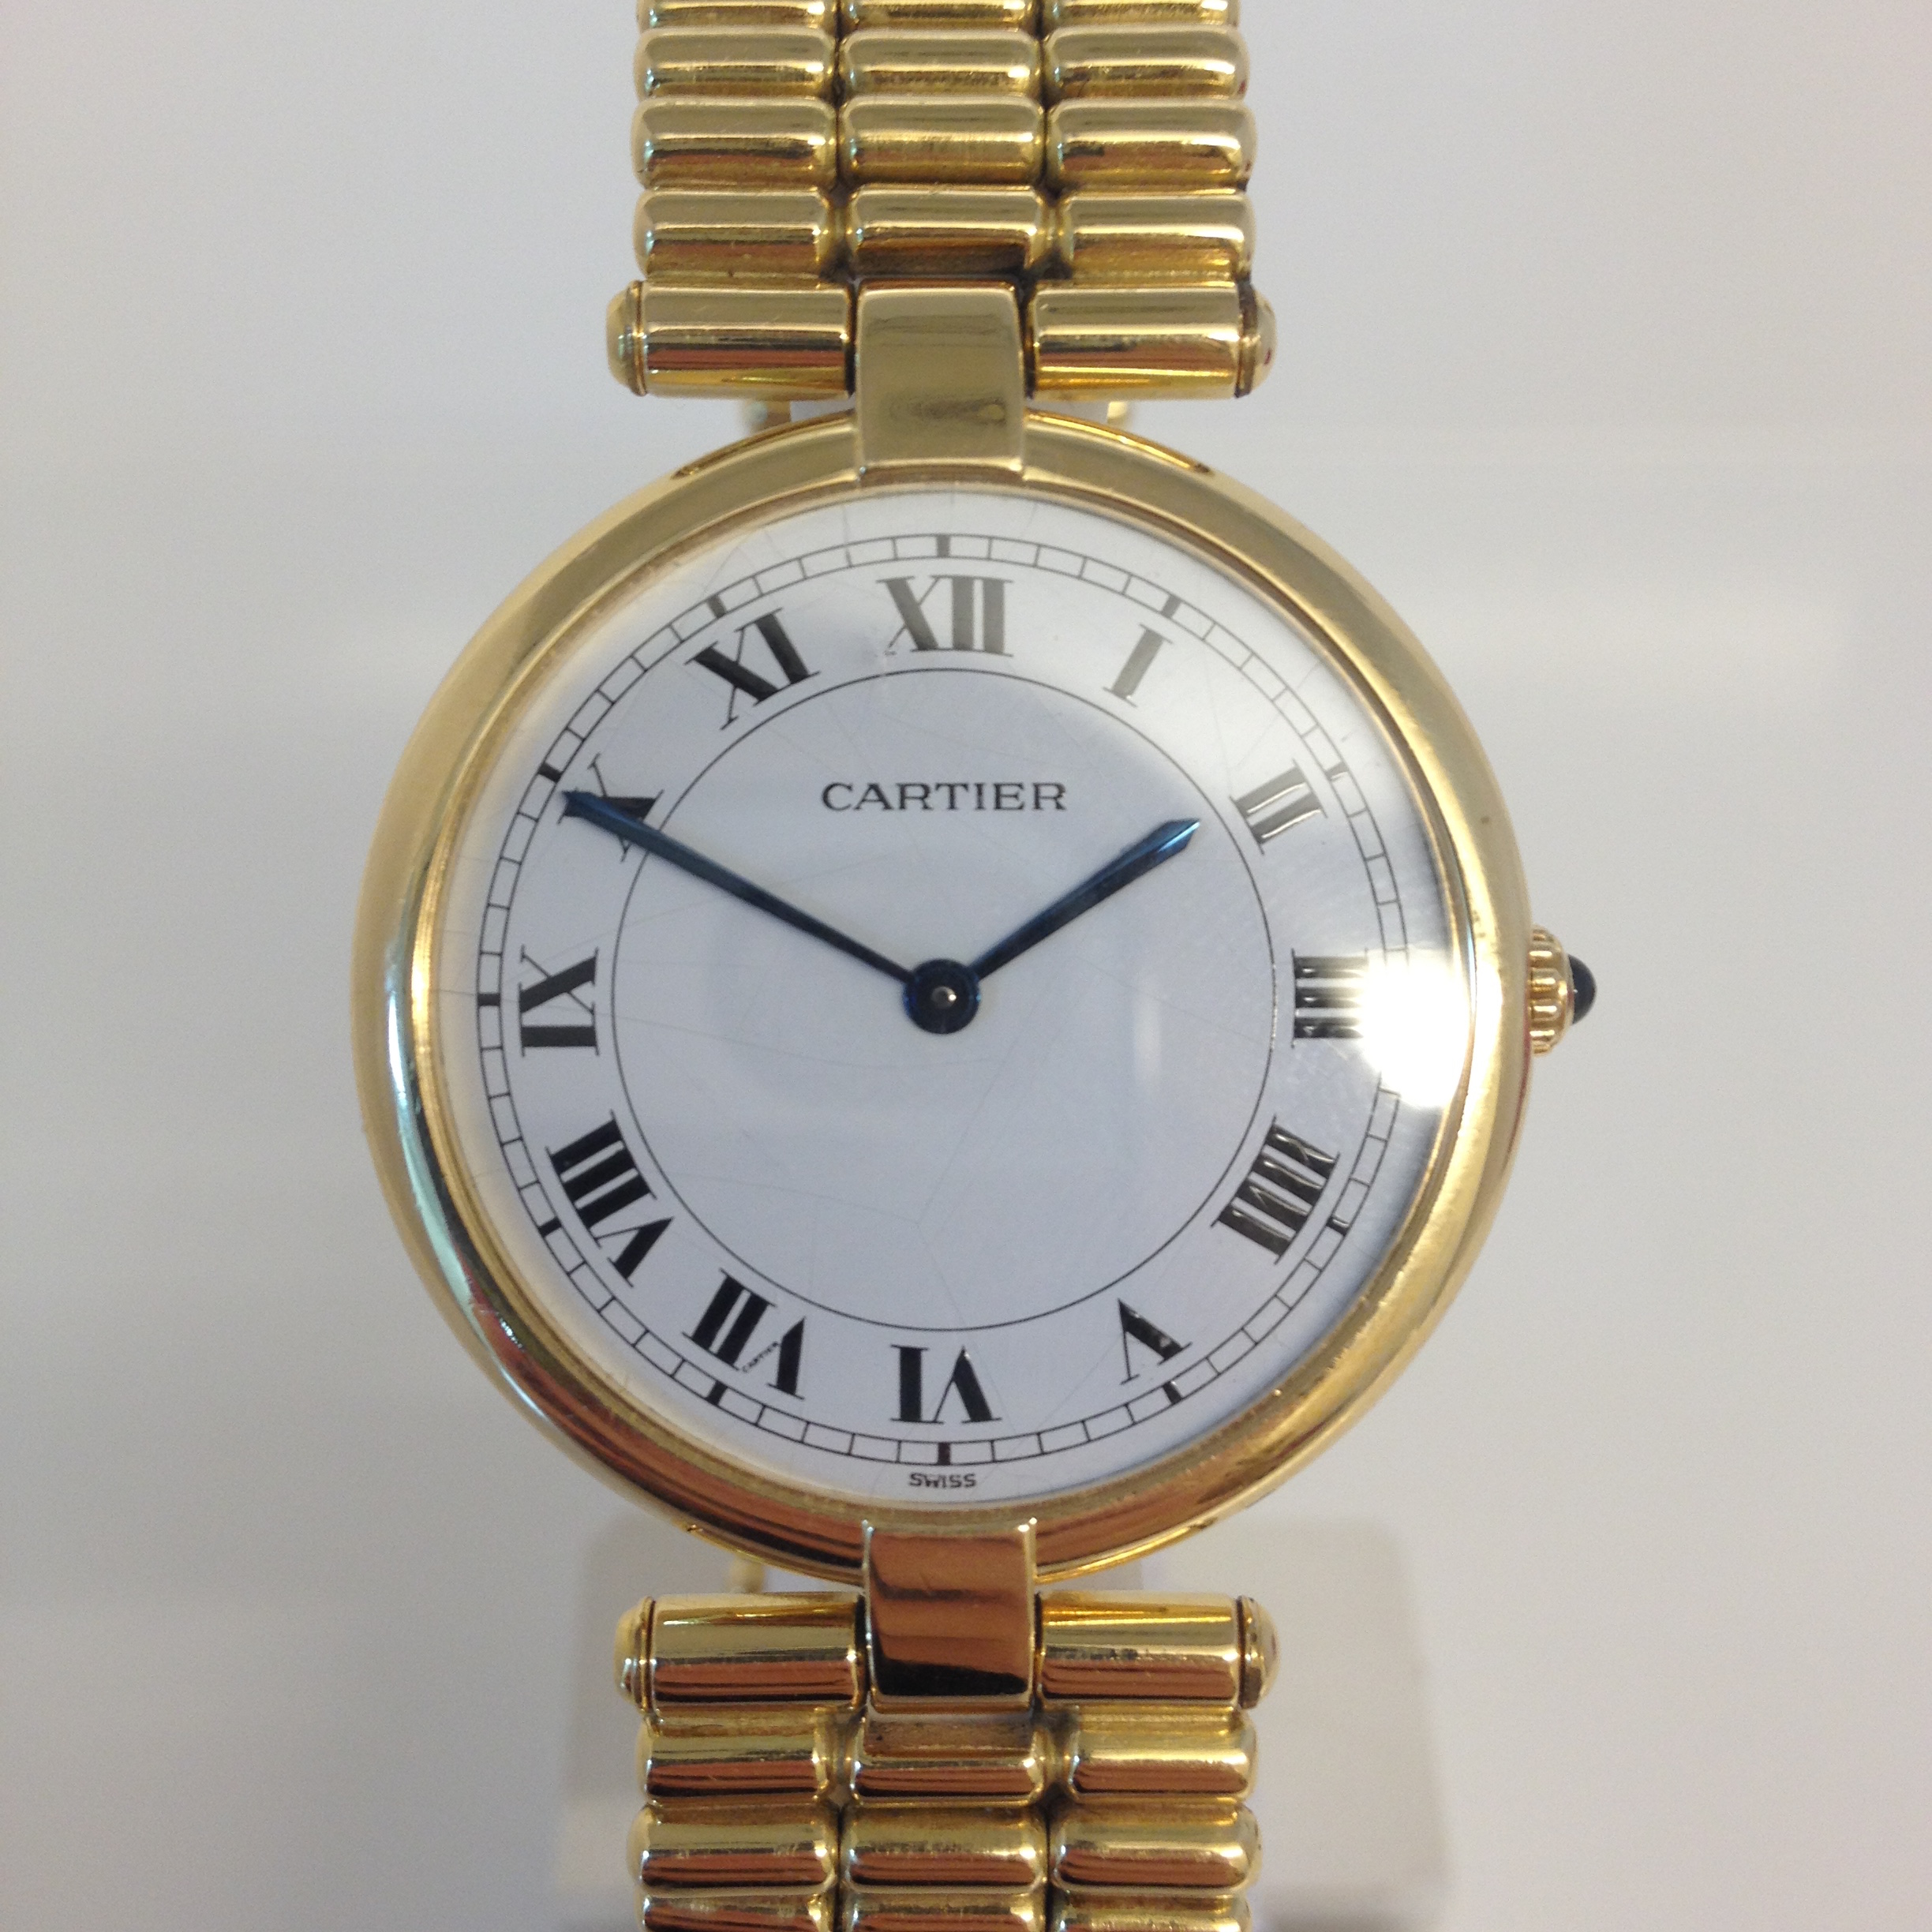 18ct yellow gold Cartier bracelet Watch Pre-Owned - Image 2 of 5